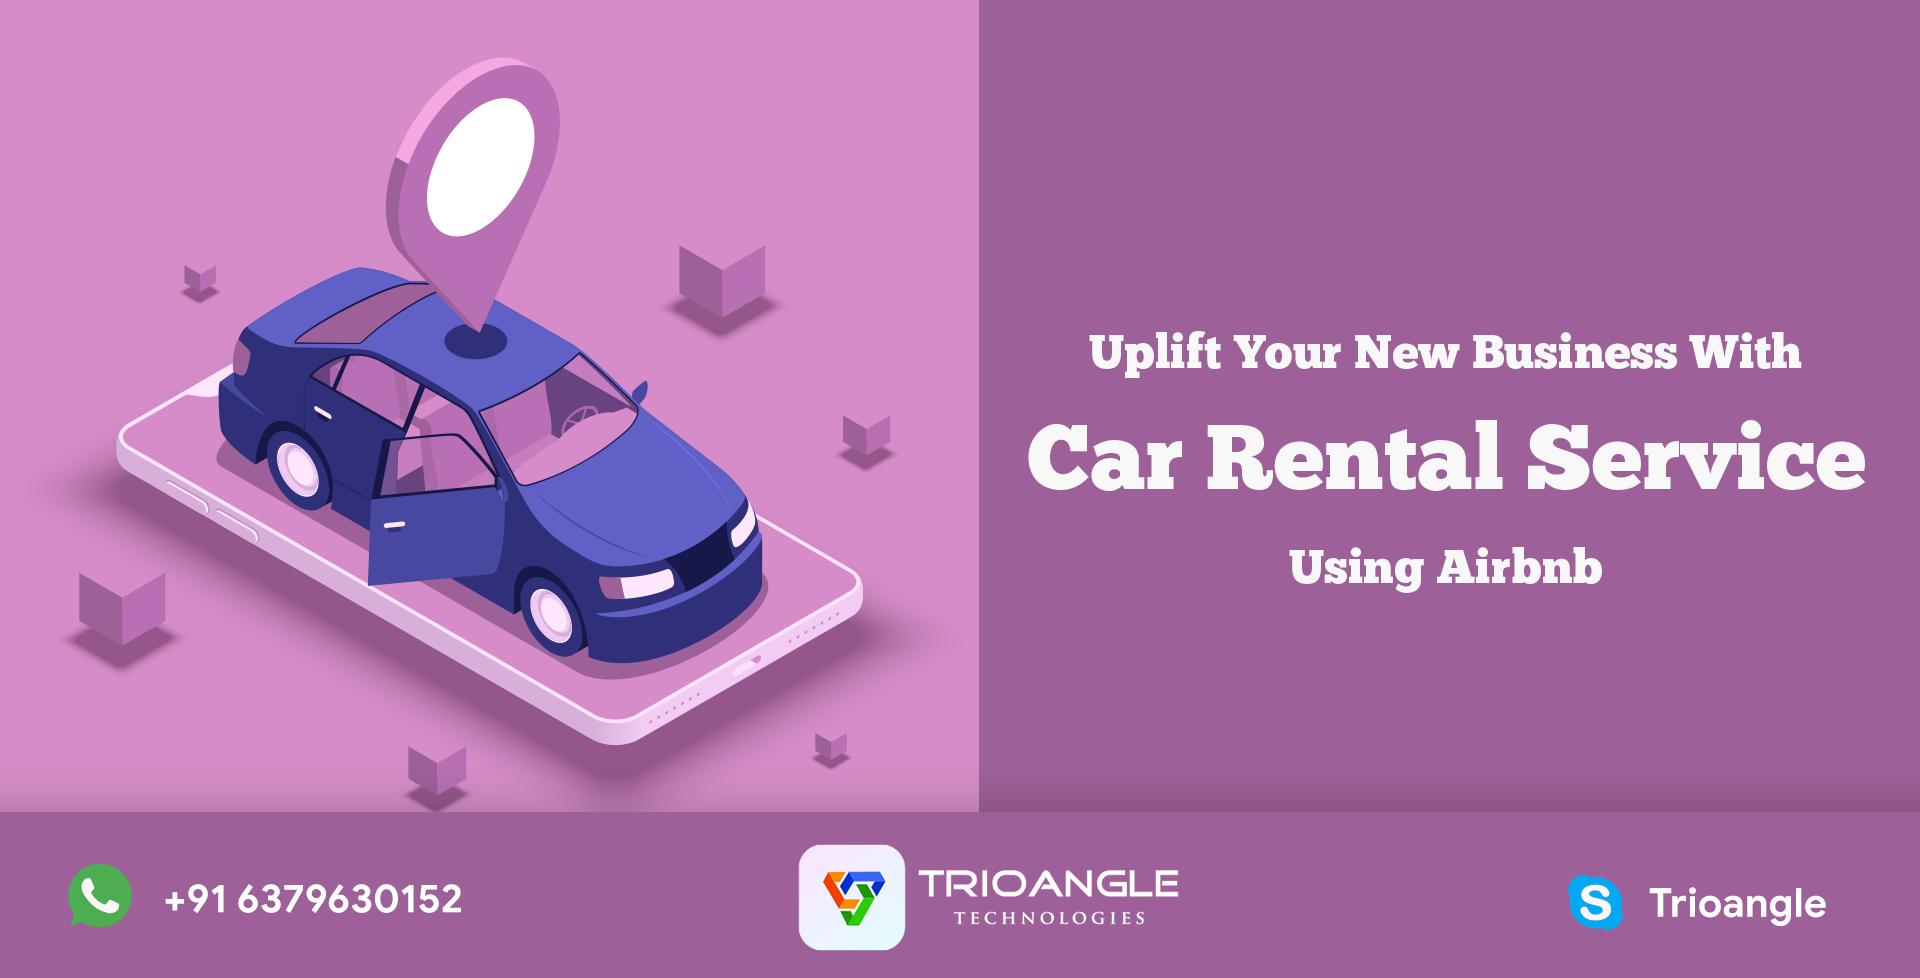 Uplift Your New Business With Car Rental Service Using Airbnb